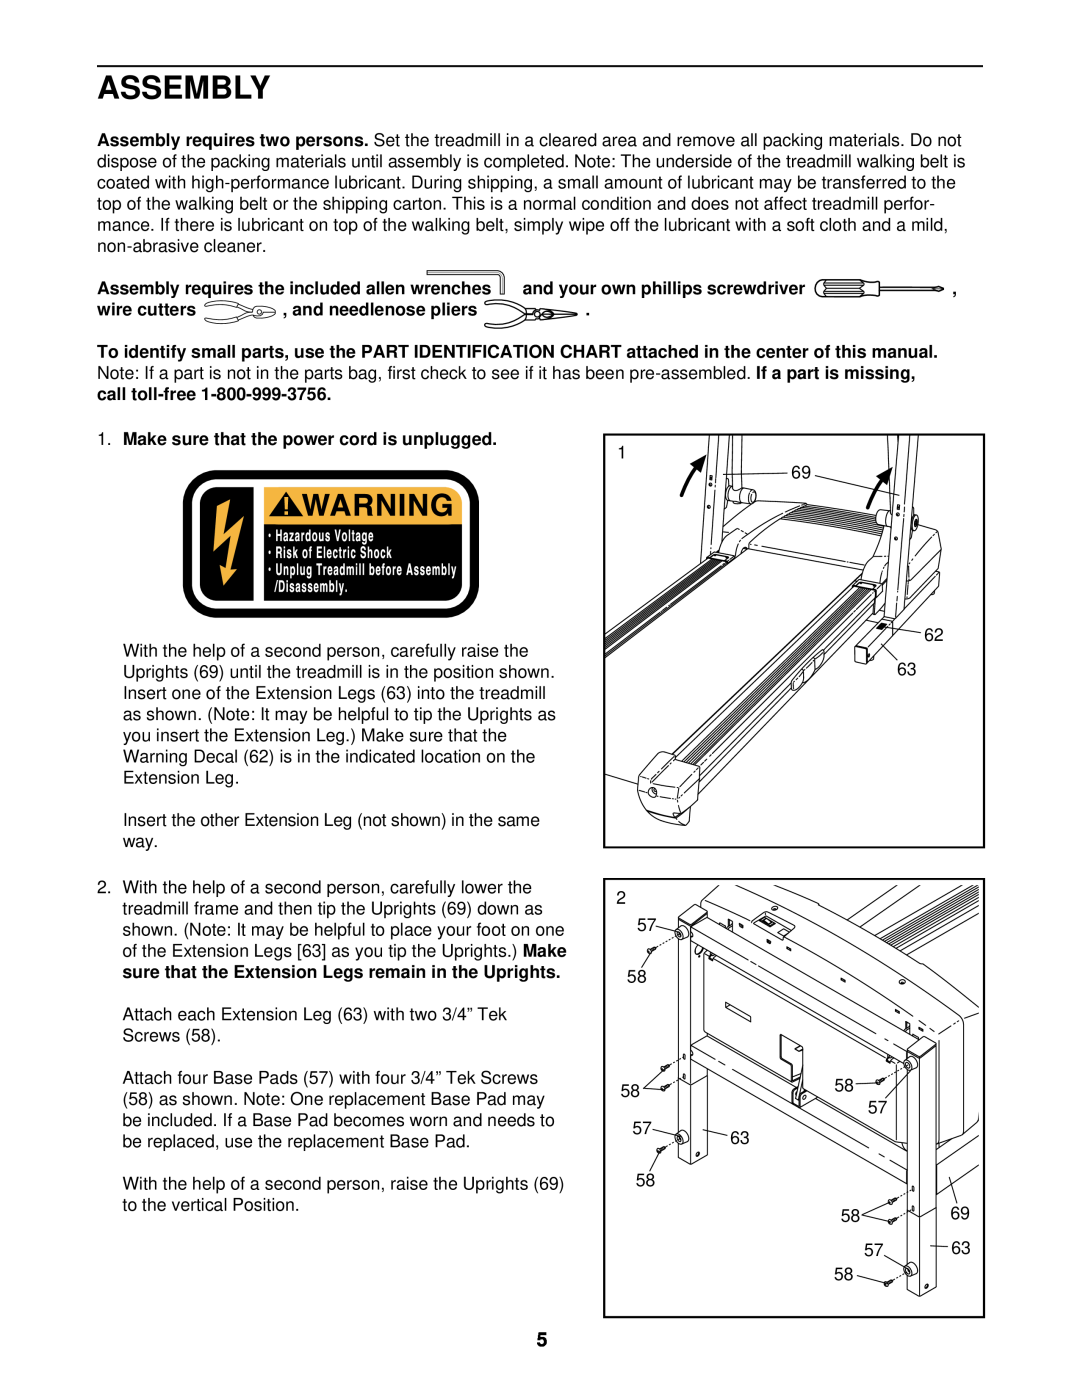 ProForm 831.293040 user manual Assembly requires the included allen wrenches, wire cutters, and needlenose pliers 